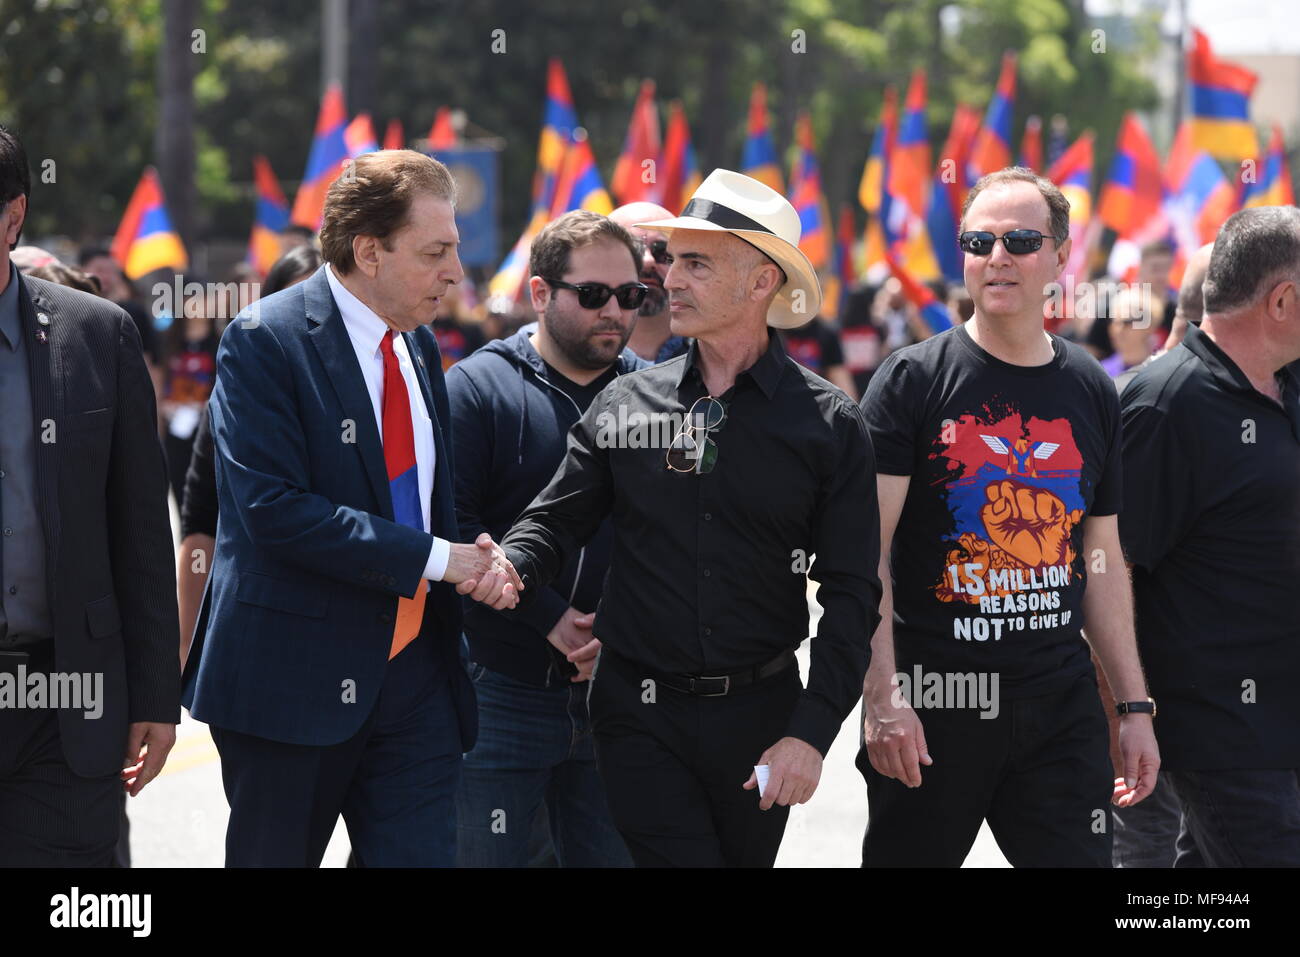 Los Angeles, USA. April 24, 2018 - LOS ANGELES — High-ranking politicians, as well as local, state, and federal government officials as U.S. Rep. Adam Schiff (D-Burbank) marching to commemorate the 103rd anniversary commemoration of the Armenian Genocide on April 24 in Little Armenia, Los Angeles, CA. Credit: Hayk Shalunts/Alamy Live News Stock Photo